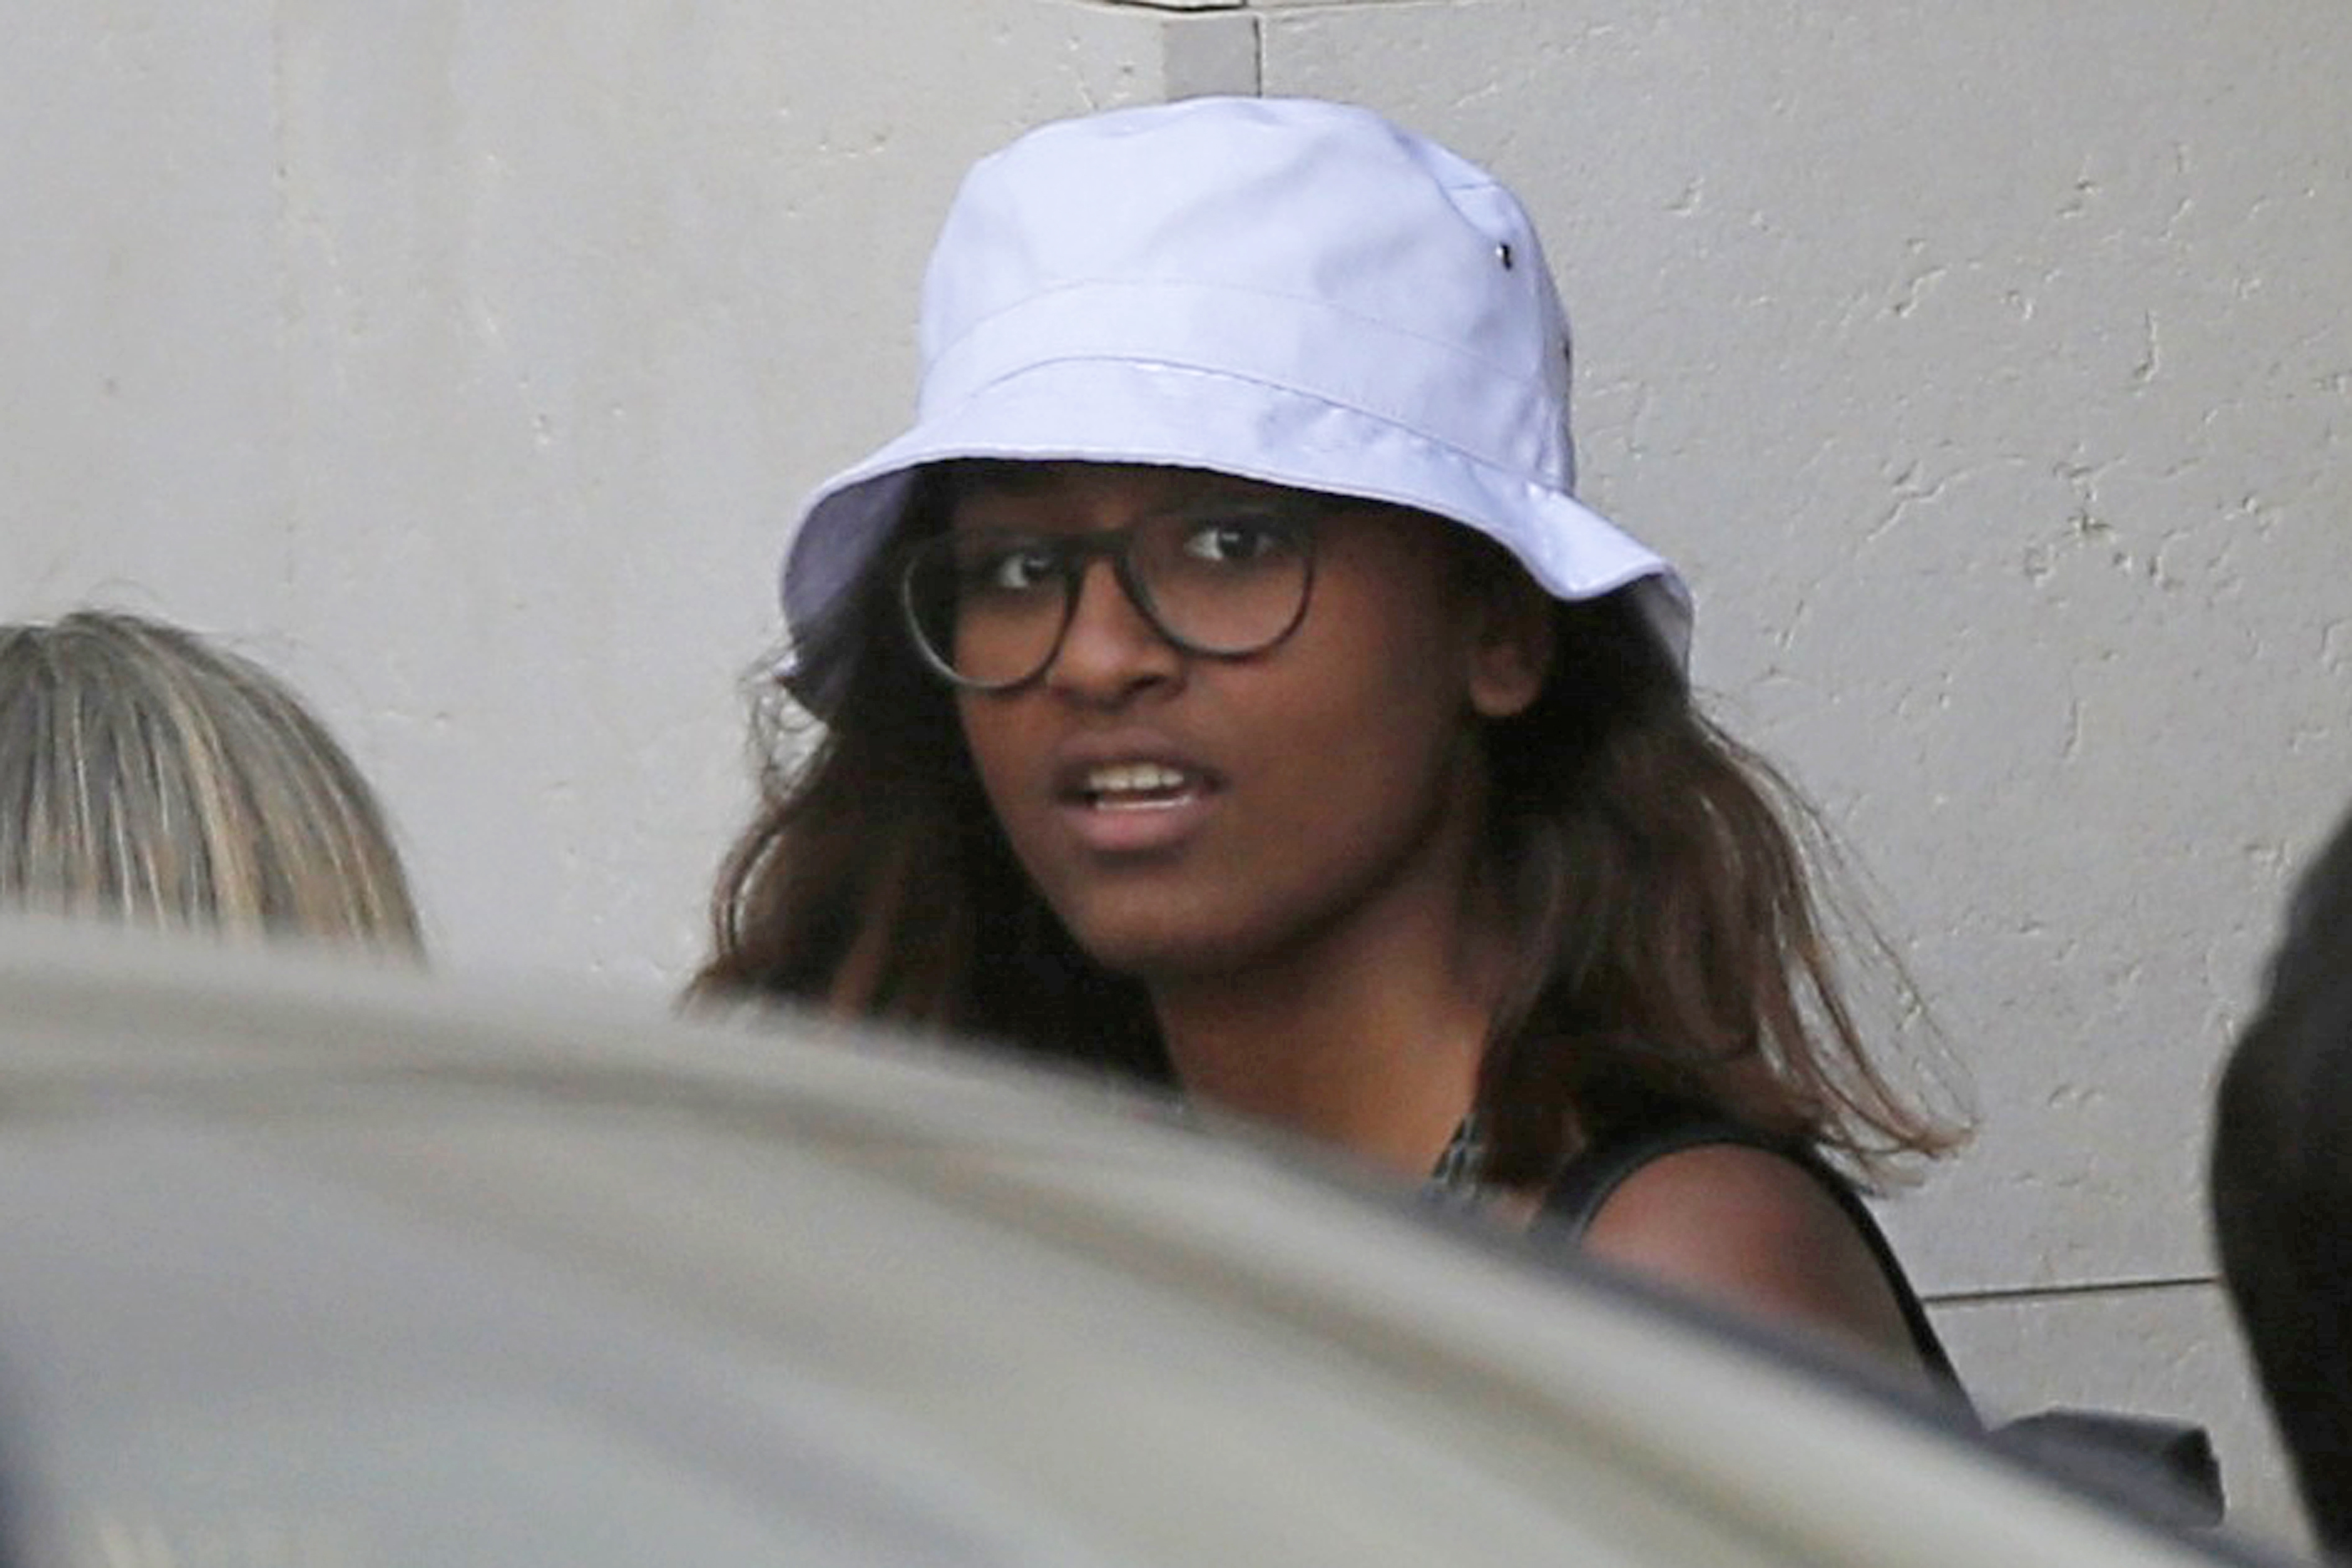 Jay-Z proves you can wear a bucket hat at any age